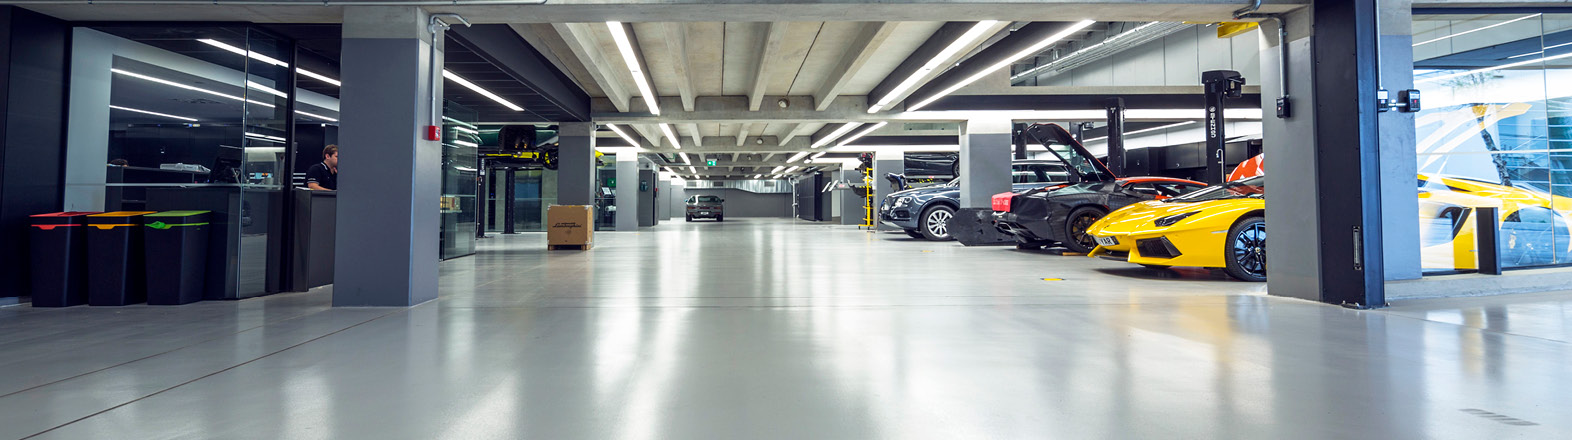 Tough Flooring for the Automotive Sector